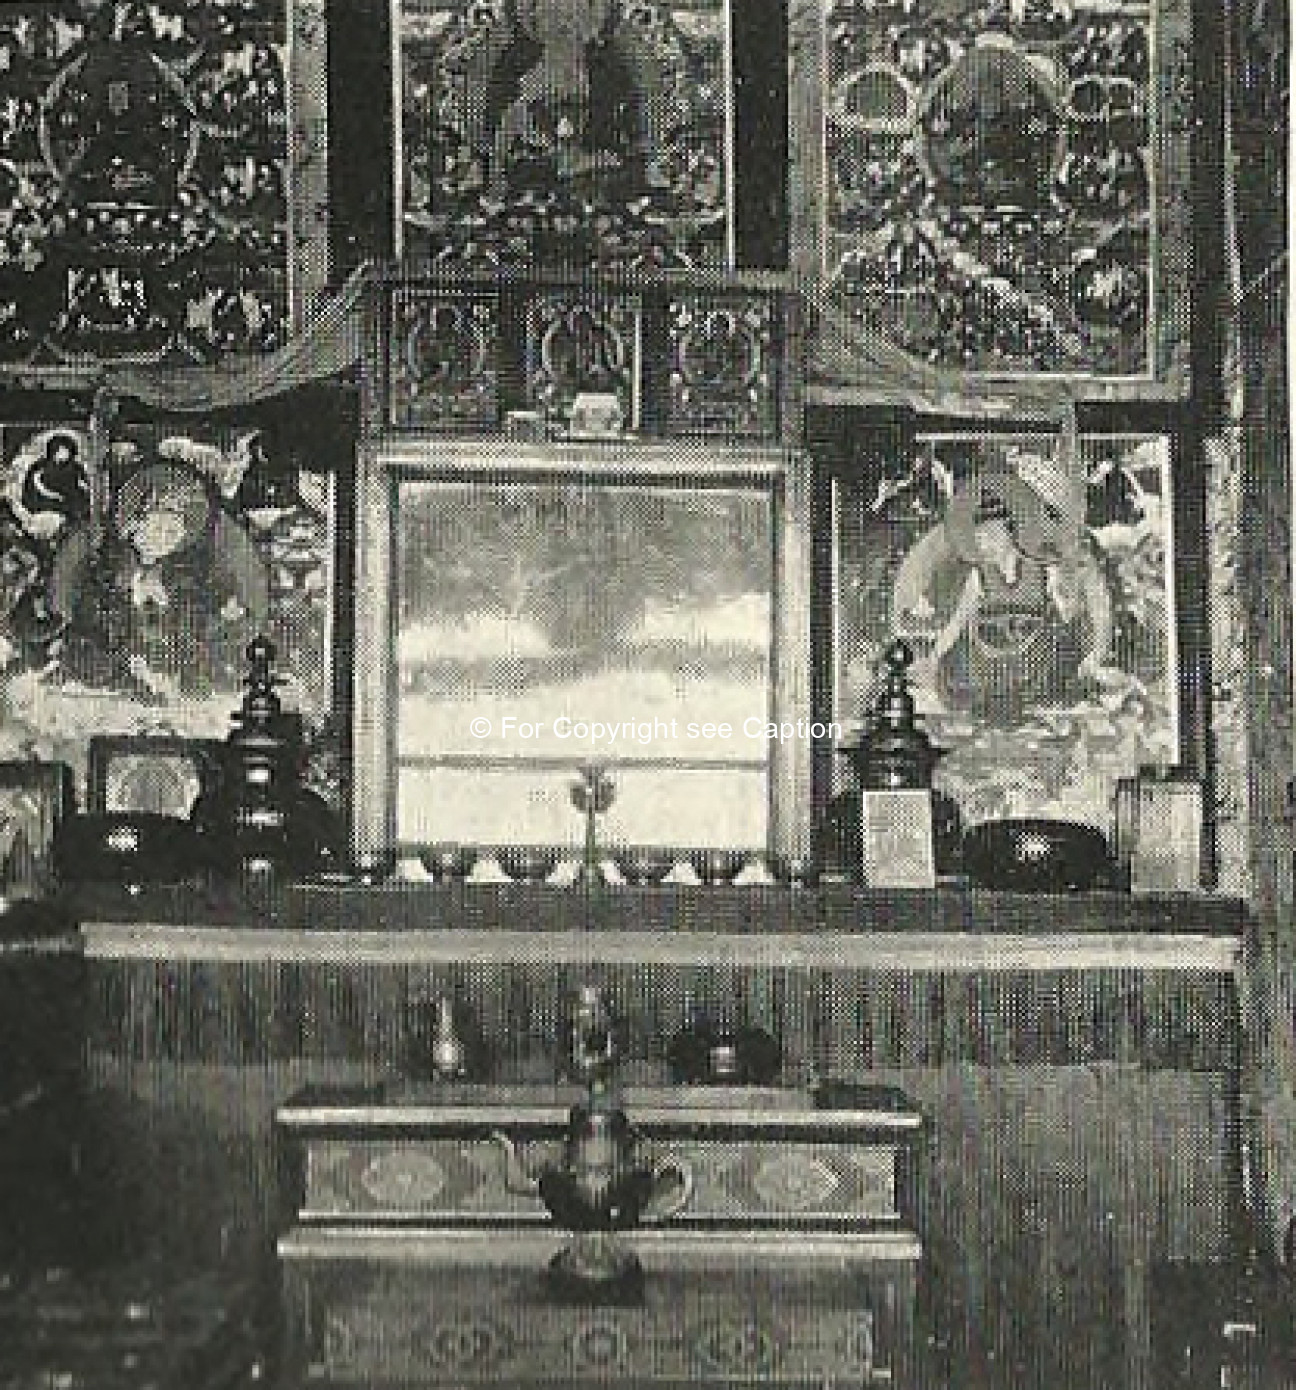 The private chapel. Binsteed, G. C., 